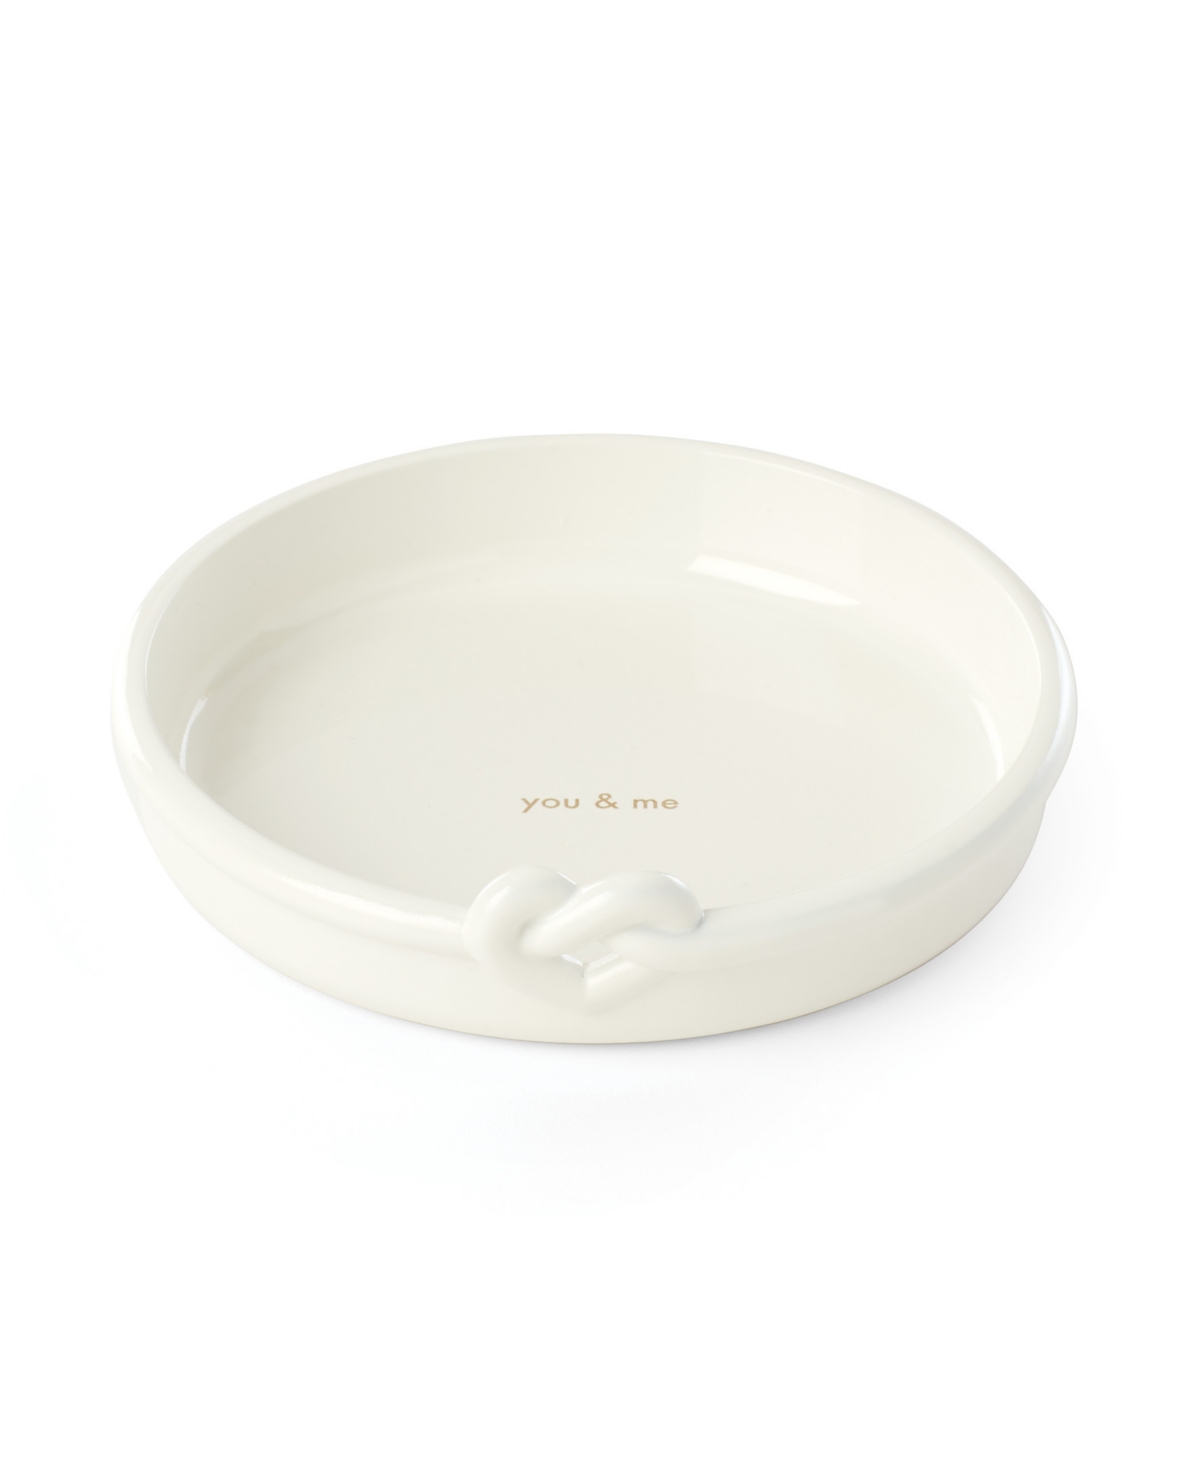 With Love Ring dish